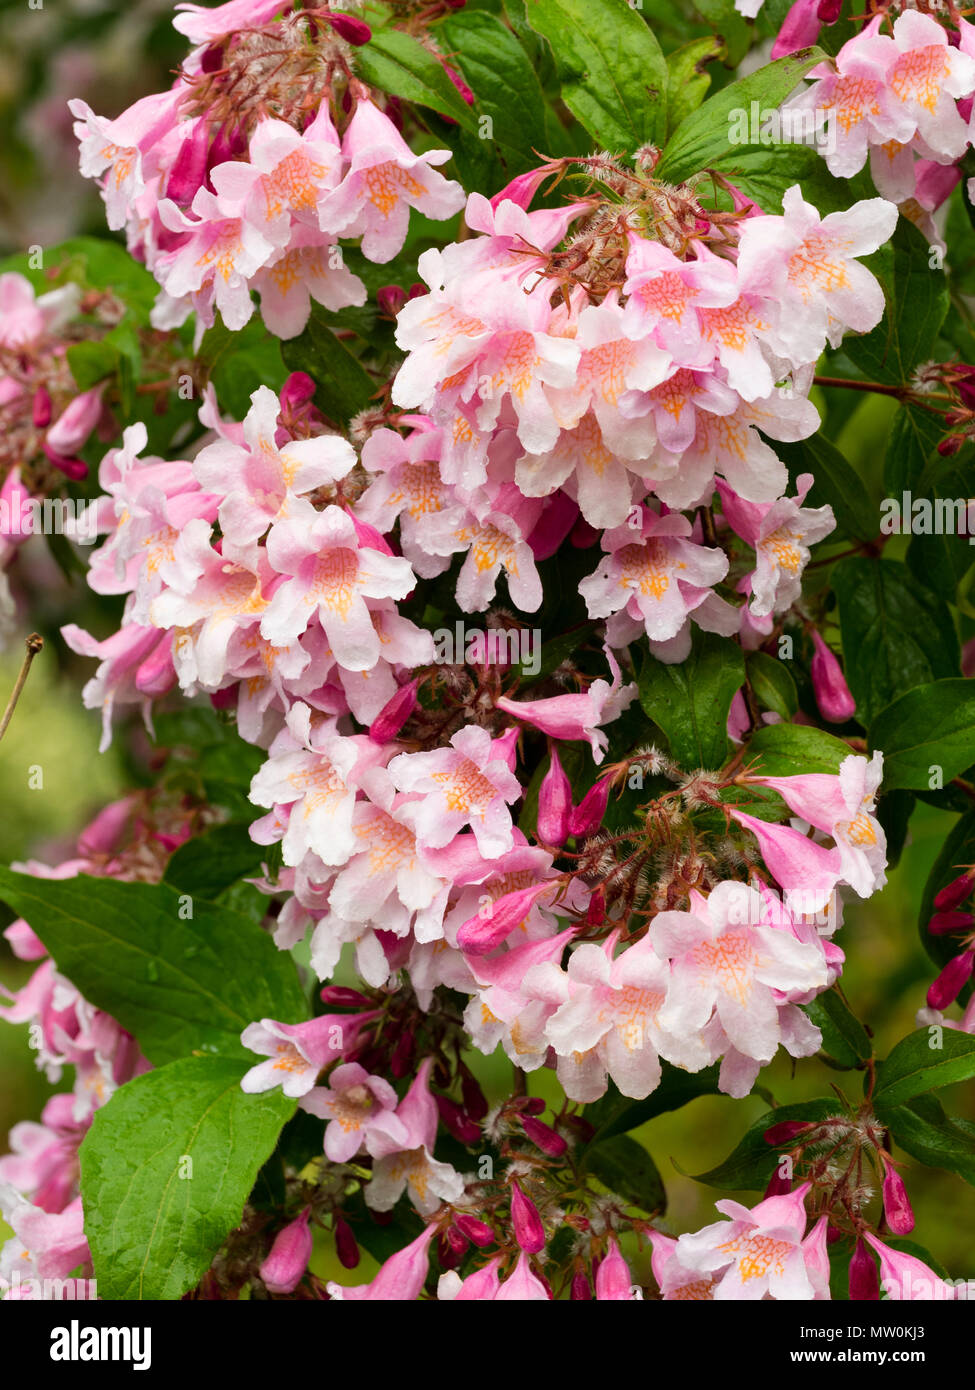 Close up of the pink flowers of the early summer blooming beauty bush, Kolkwitzia amabilis 'Pink Cloud' Stock Photo